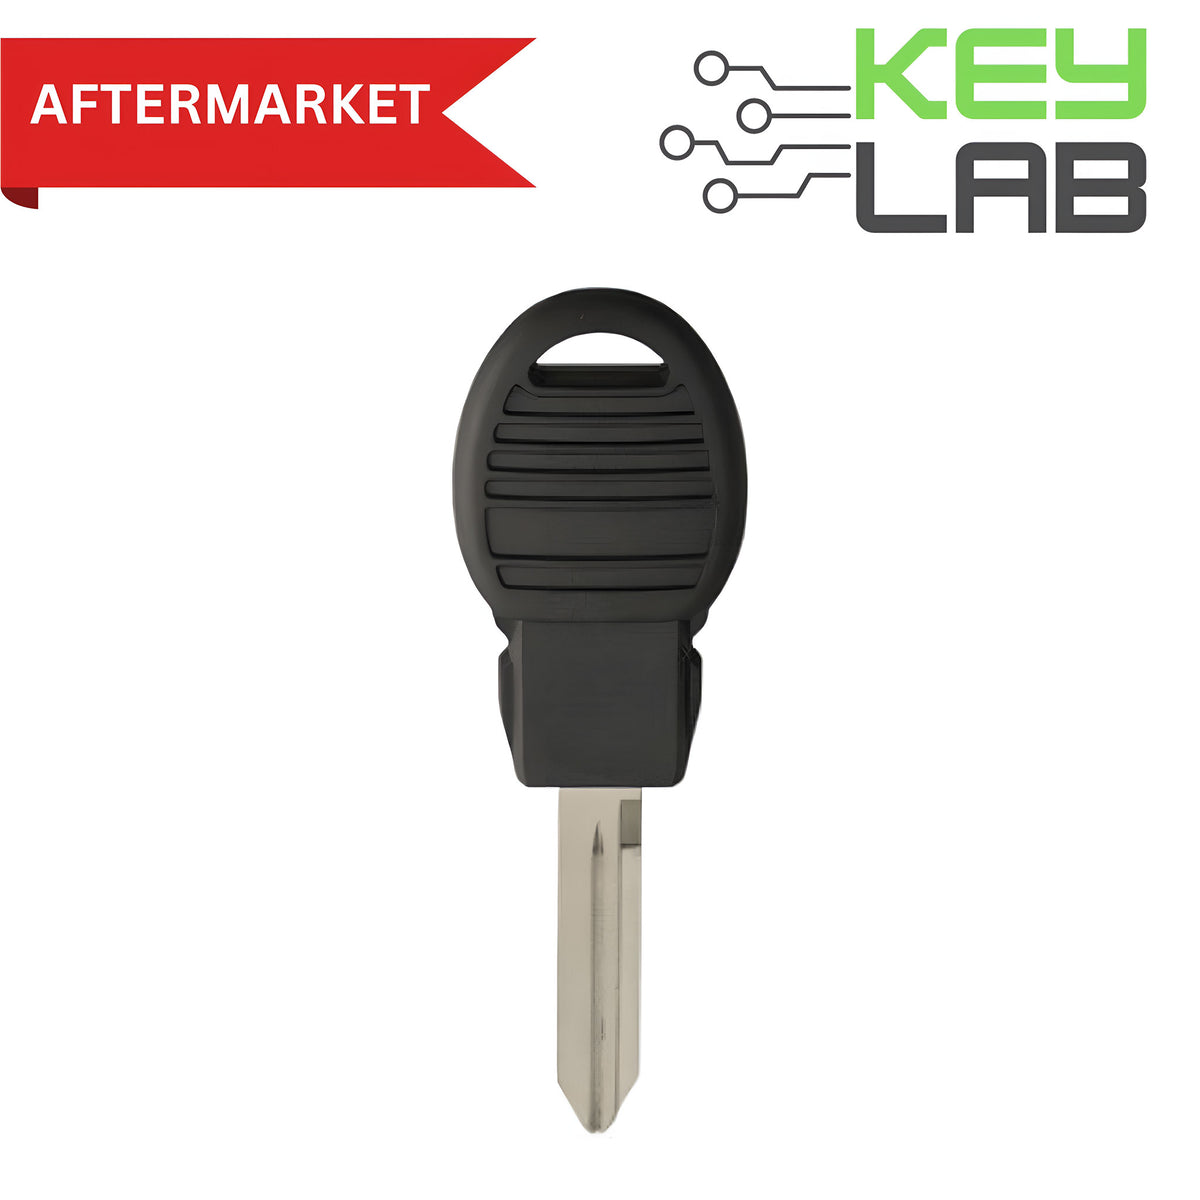 Chrysler Aftermarket 2008-2020 Town & Country, Challenger, Charger, Dart, Journey, Commander, Grand Cherokee Transponder Key Y170-PT PN# 68033740AA - Royal Key Supply